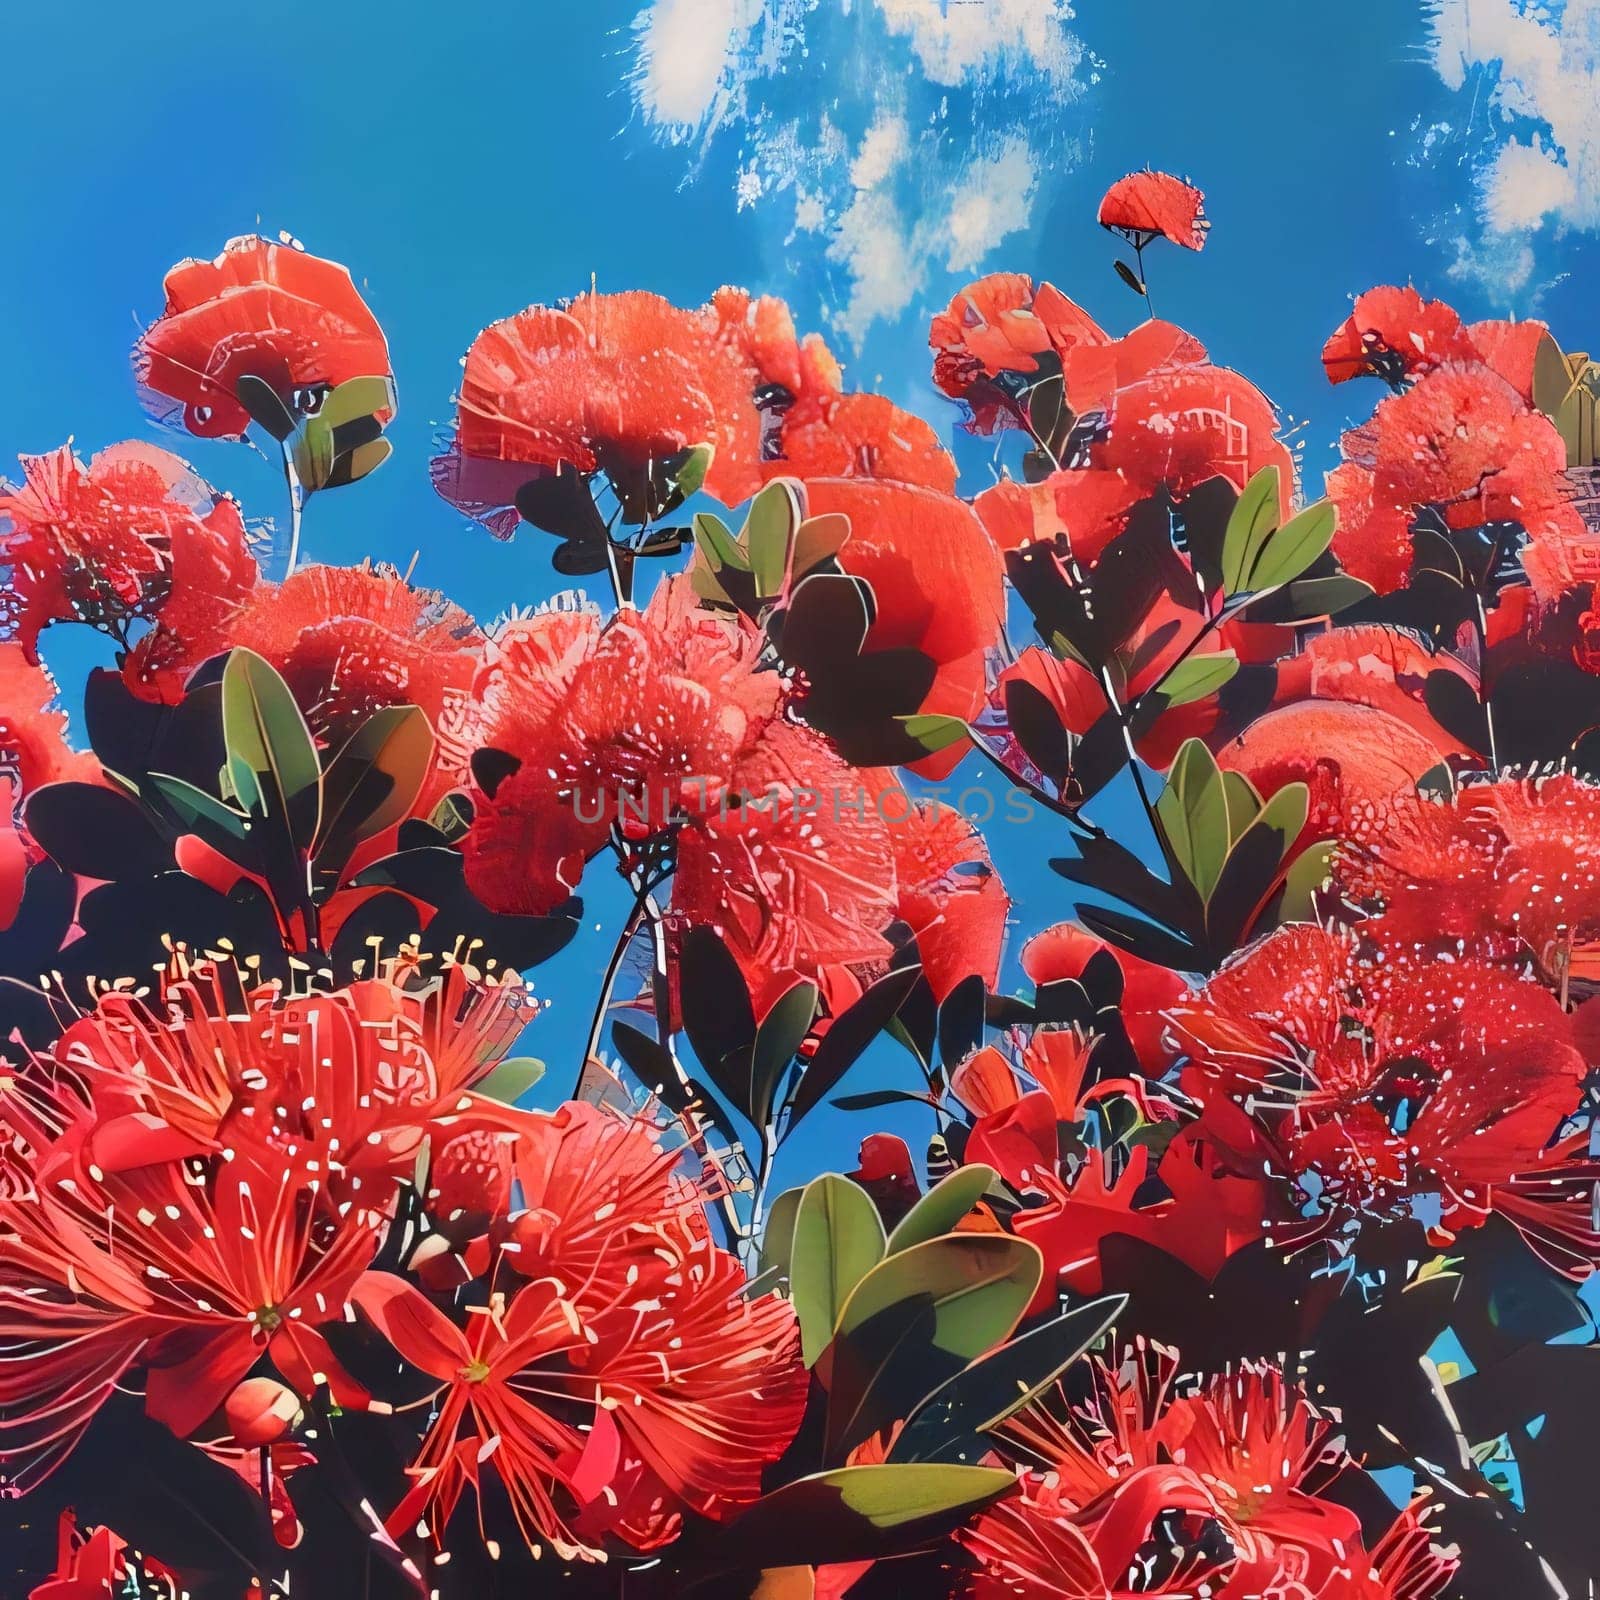 Illustration of red flowers against the sky. Flowering flowers, a symbol of spring, new life. A joyful time of nature waking up to life.